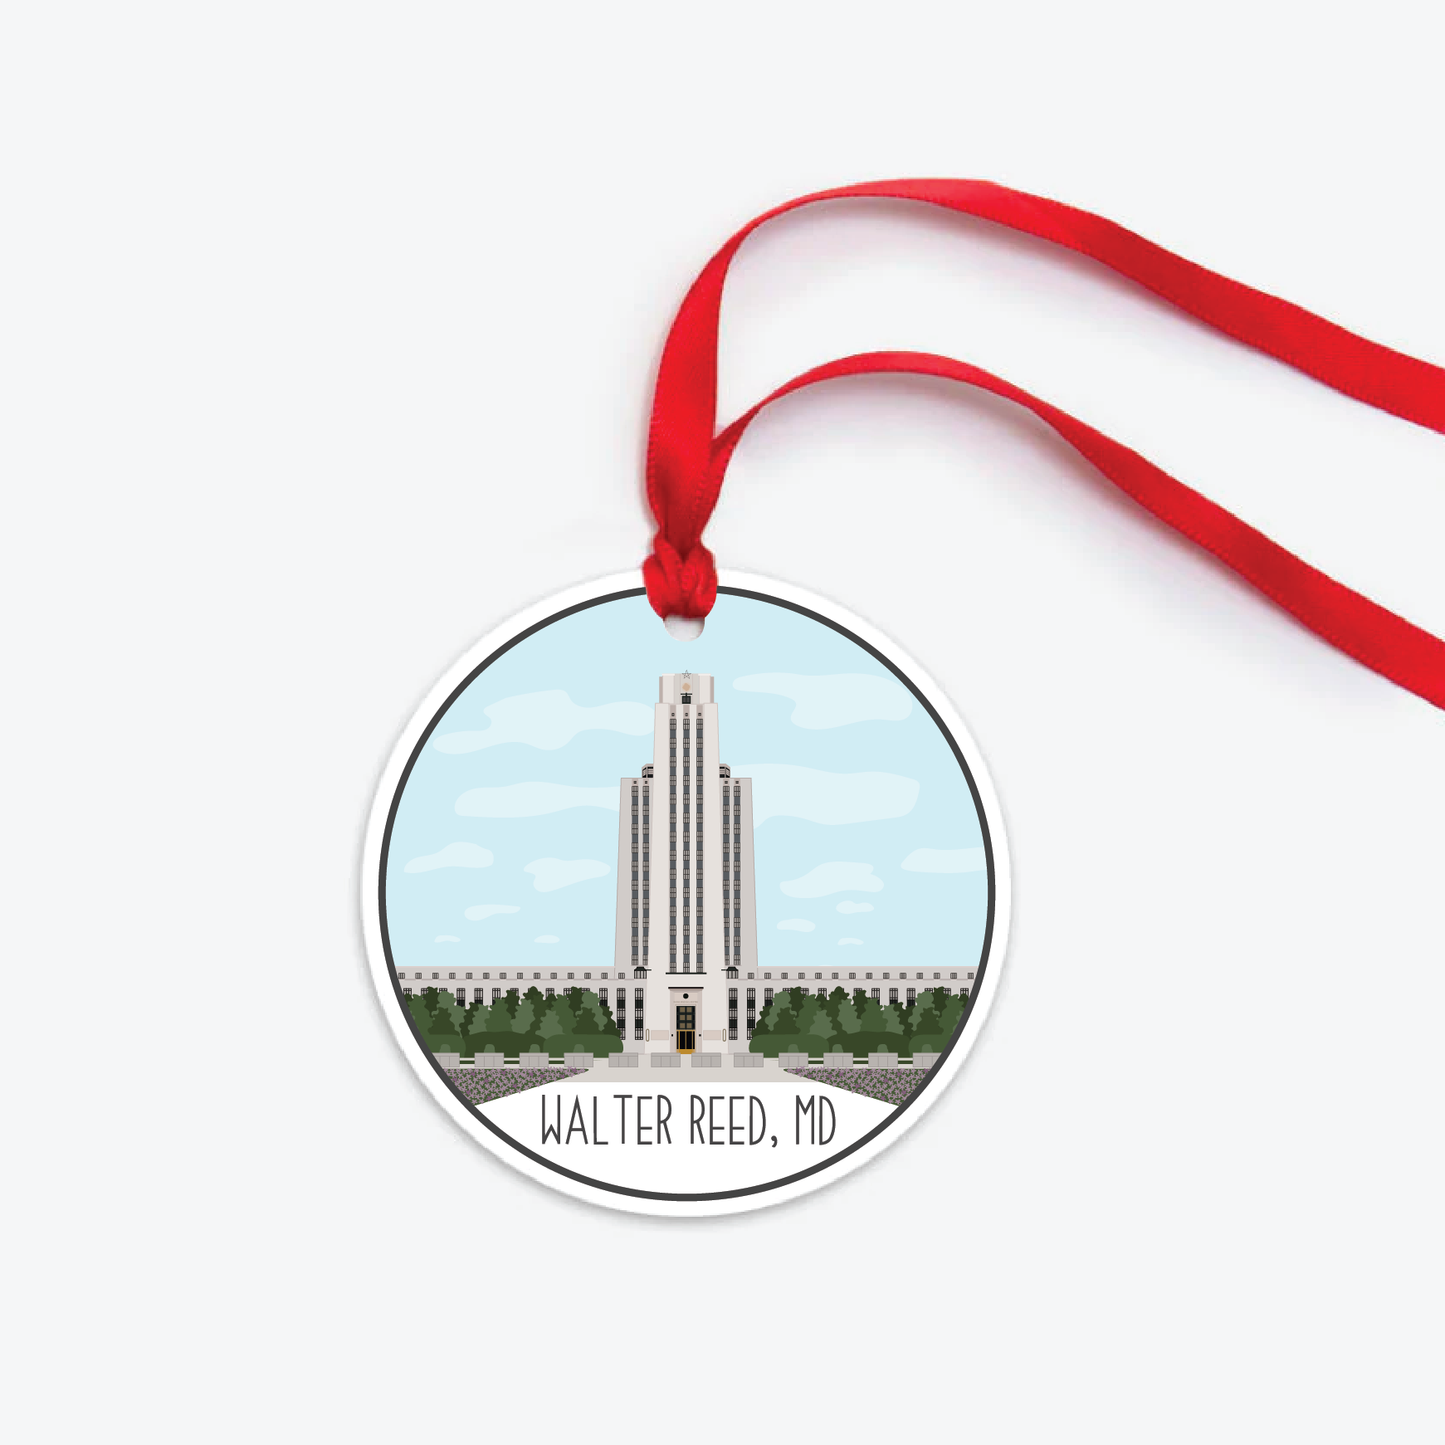 Walter Reed Ornament